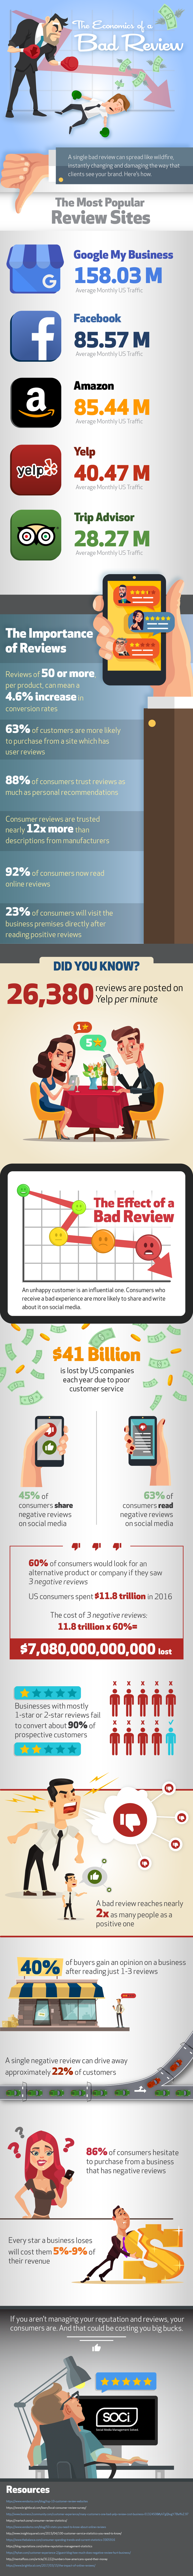 The Economics of a bad review